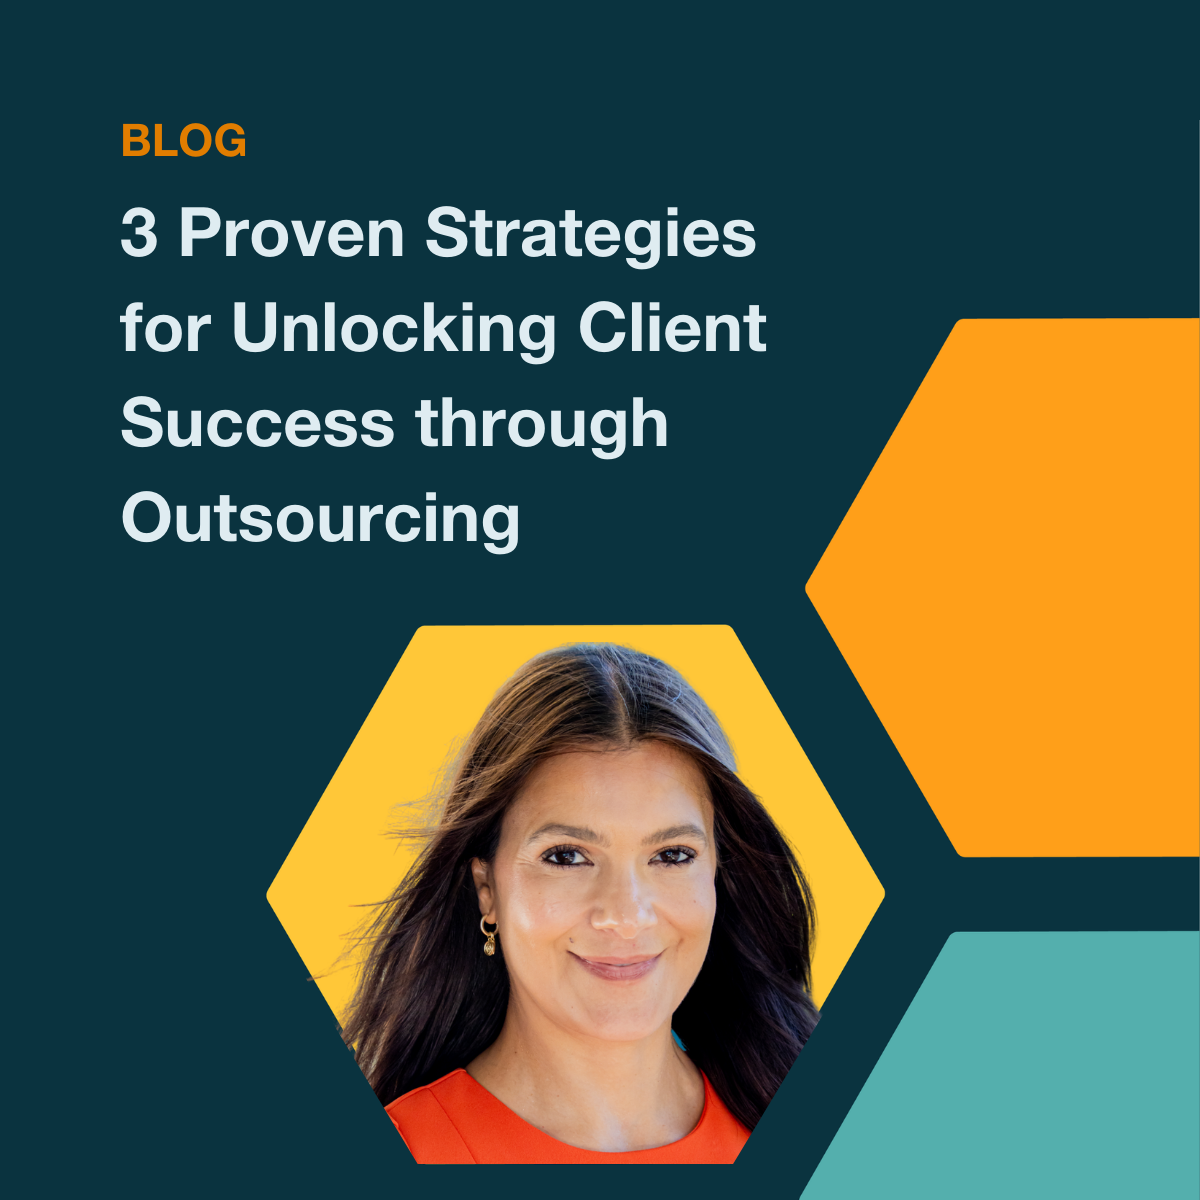 3 Proven Strategies for Unlocking Client Success Through Outsourcing